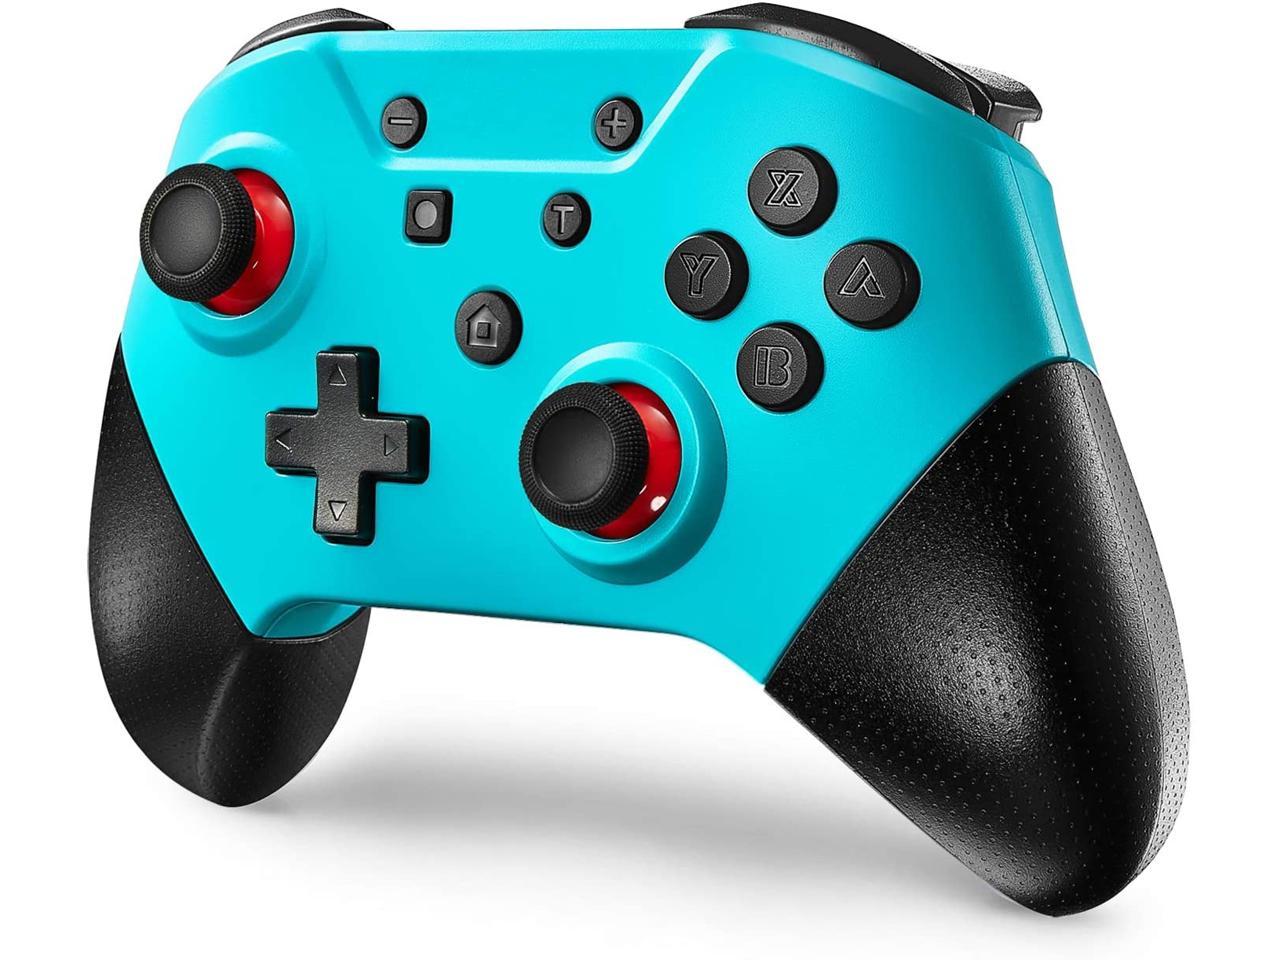 Comdigio Switch Pro Controller For Nintendo Switch And Pc Wireless Switch Controller Gamepad Joystick With Nfc And Home Wake Up Function Support Gyro Axis Turbo And Dual Vibration Blue Newegg Com